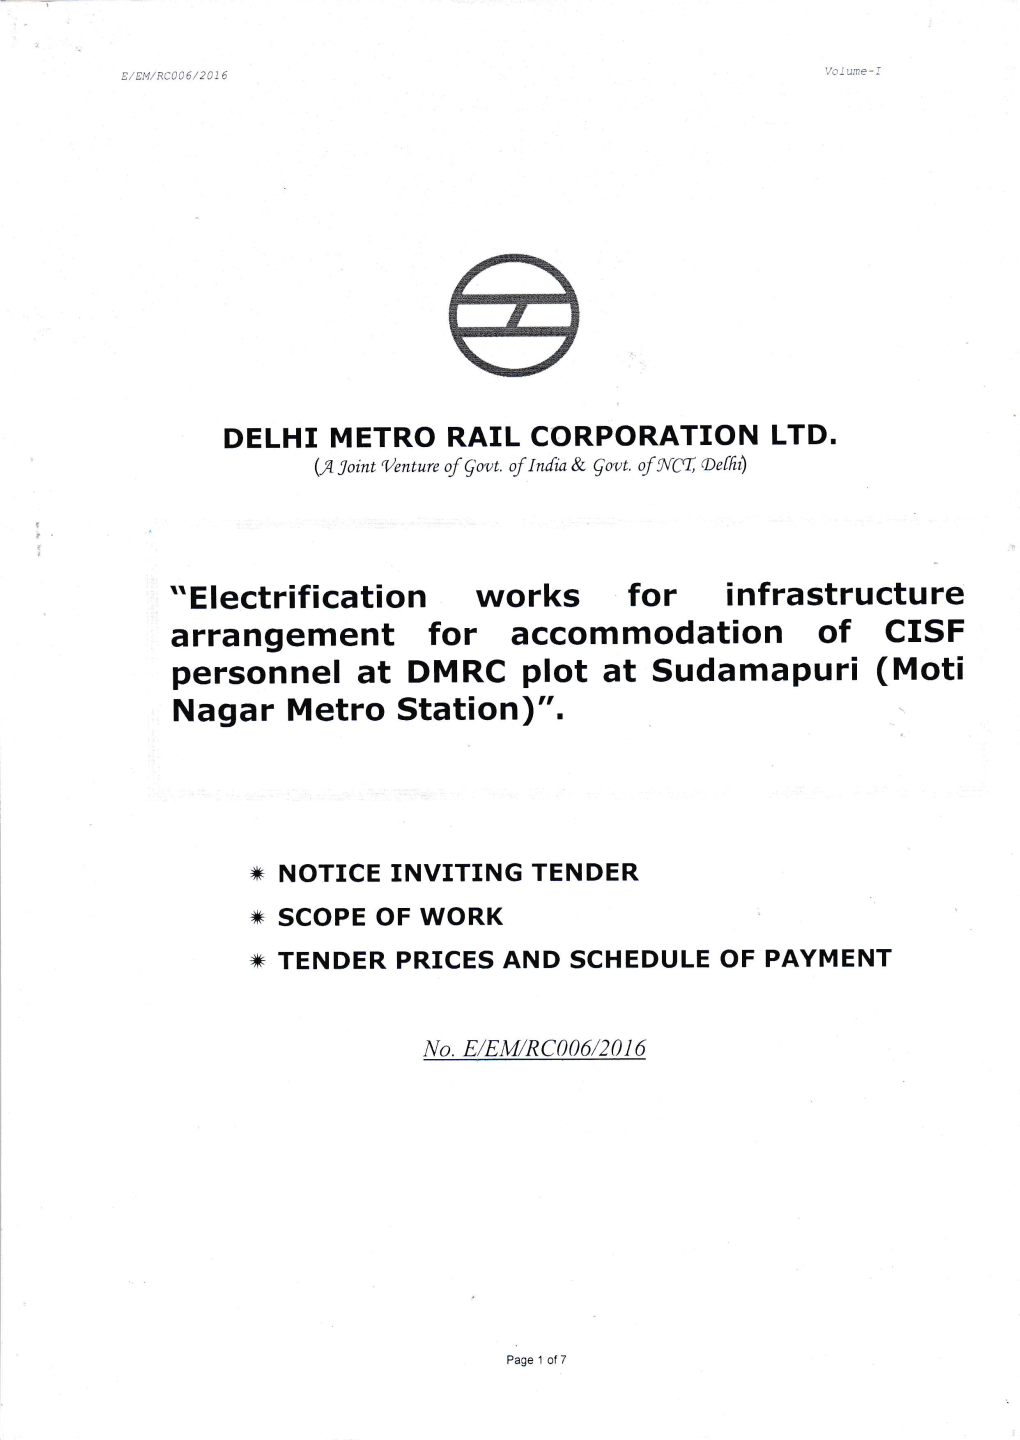 " Electrif Ication Works for Inf Rastructu Re Arrangement for Accommodation of Clsf Personnel at DMRC Plot at Sudamapuri (Moti Nagar Metro Station)"